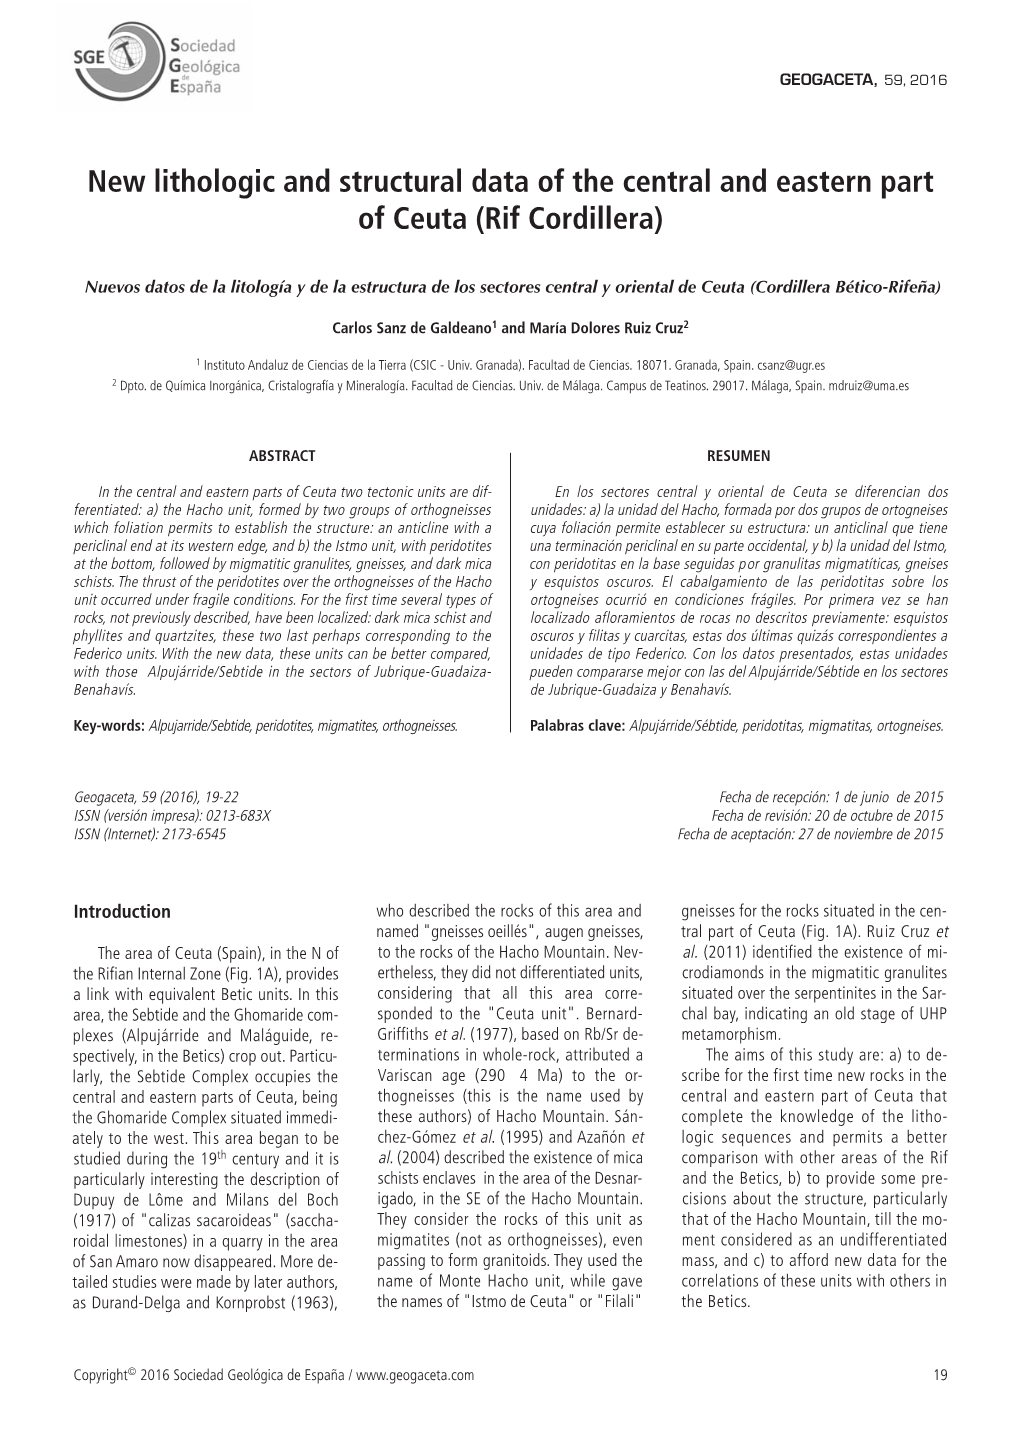 New Lithologic and Structural Data of the Central and Eastern Part of Ceuta (Rif Cordillera)